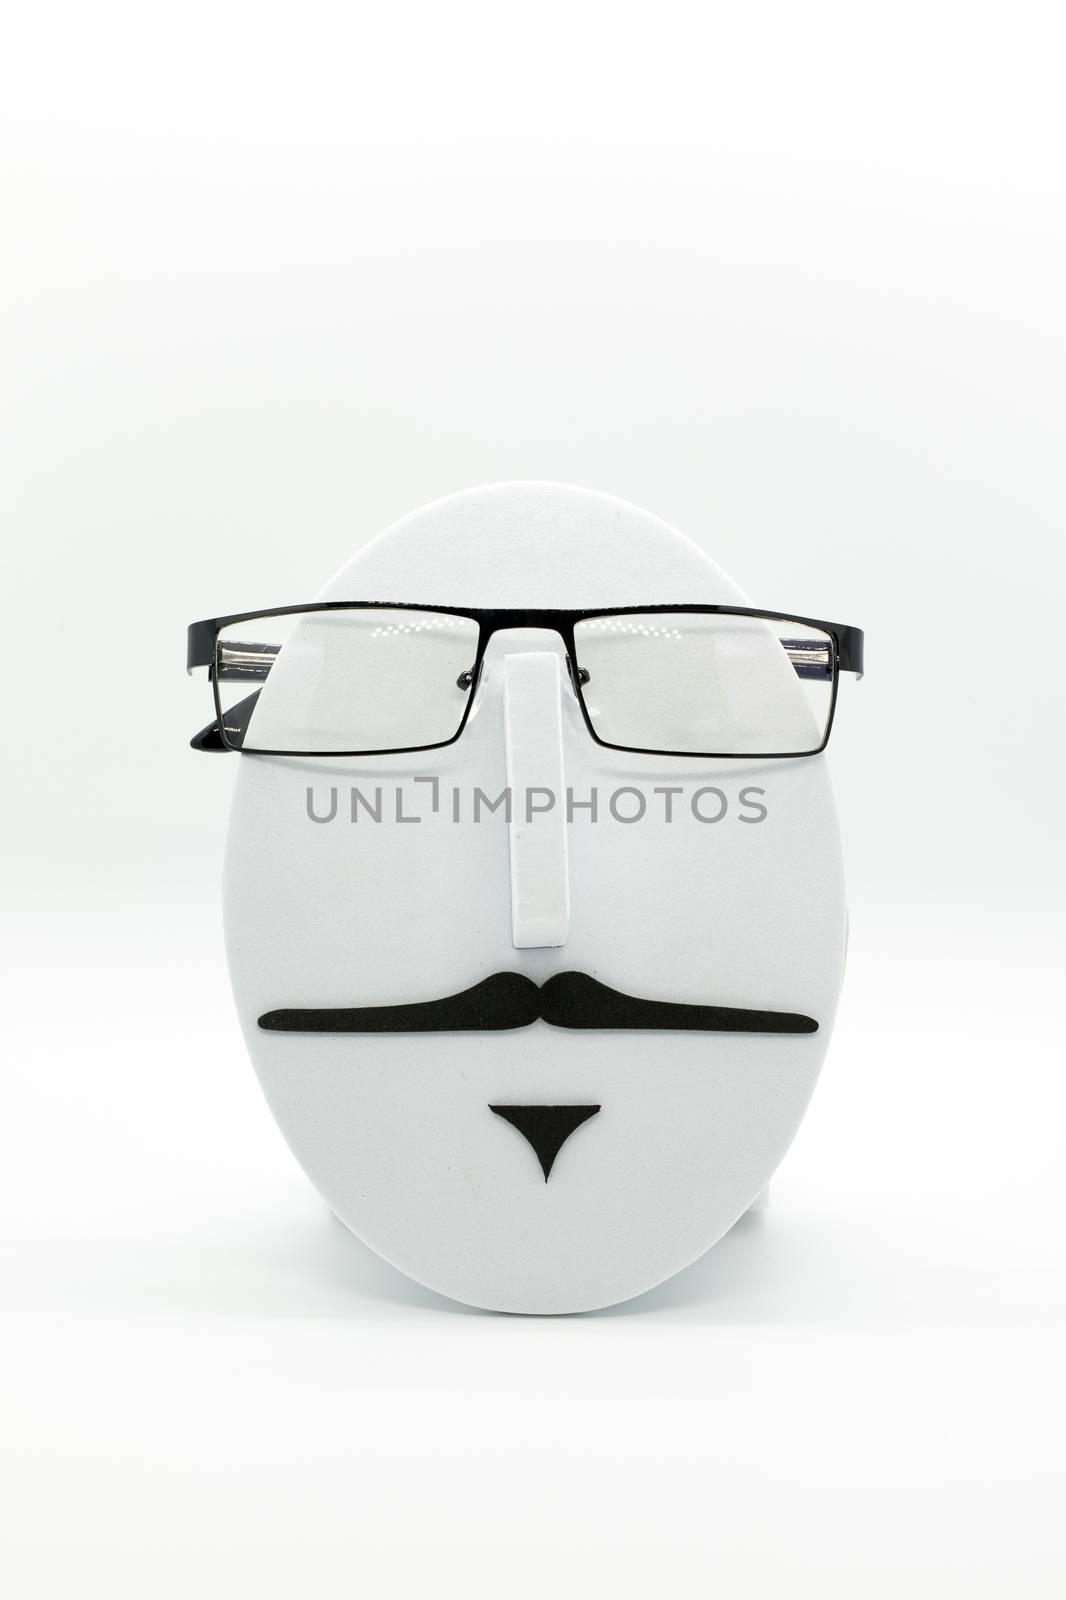 Men's fashion mannequin wearing fashionable spectacles on white background. Glasses